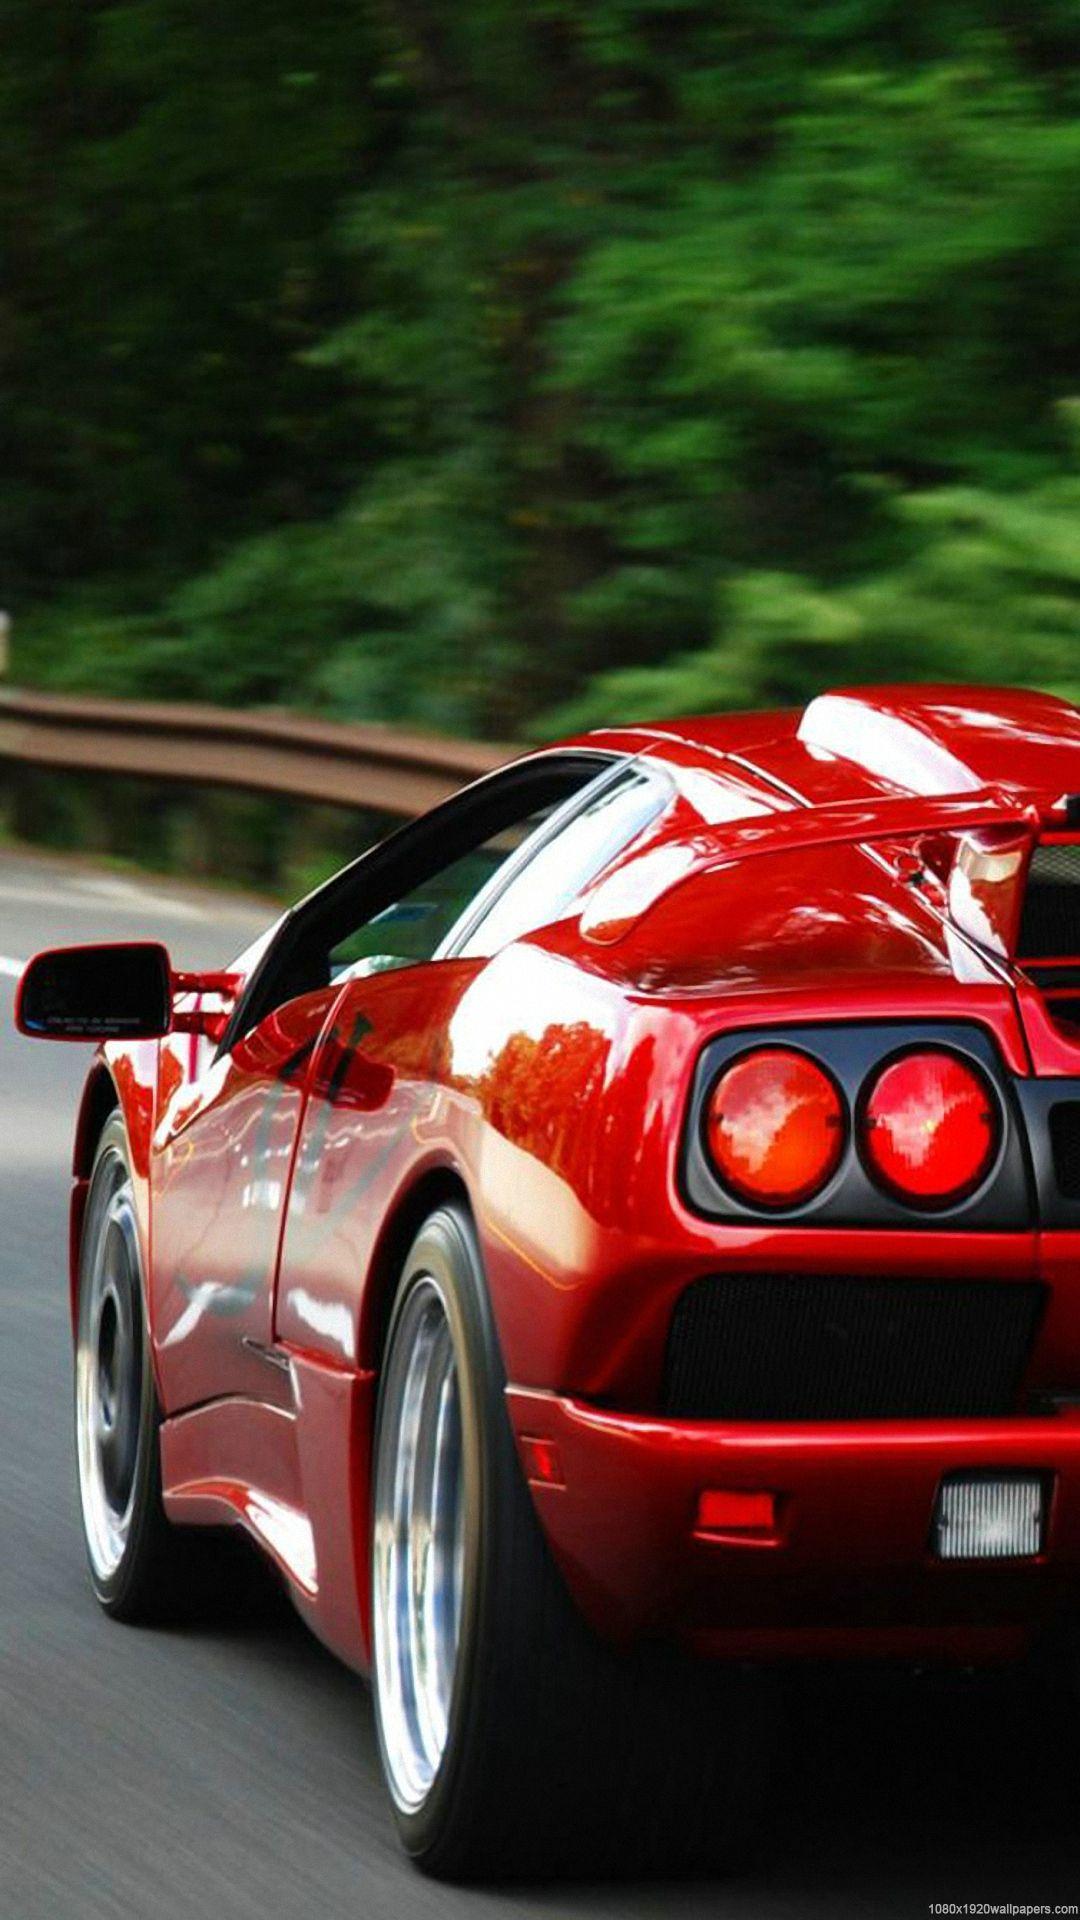 Car Wallpaper For Android image